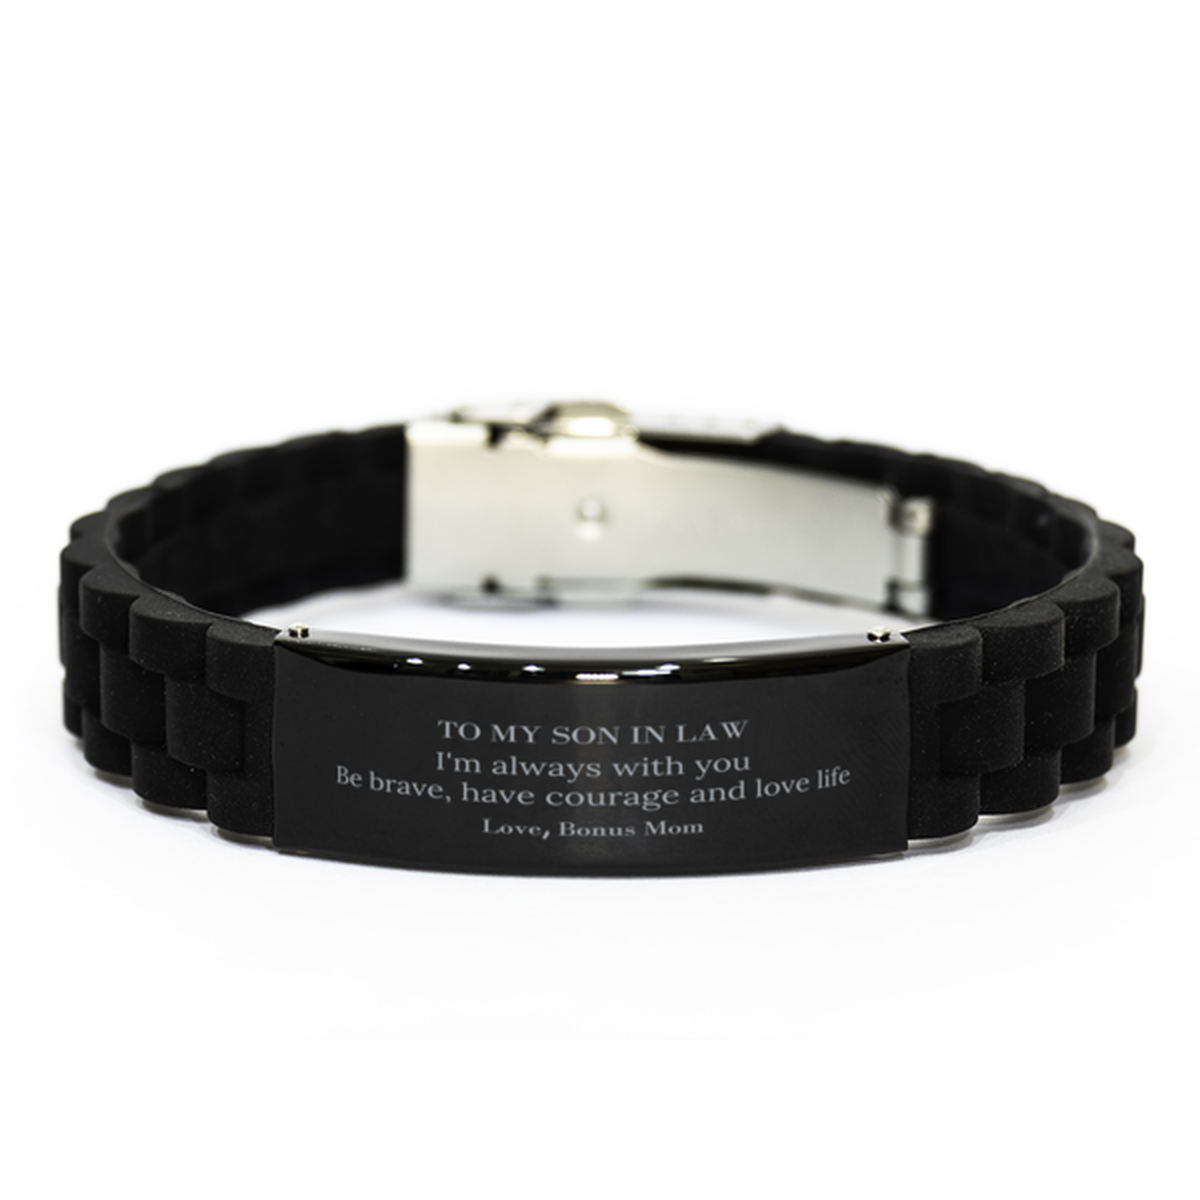 To My Son In Law Gifts from Bonus Mom, Unique Black Glidelock Clasp Bracelet Inspirational Christmas Birthday Graduation Gifts for Son In Law I'm always with you. Be brave, have courage and love life. Love, Bonus Mom